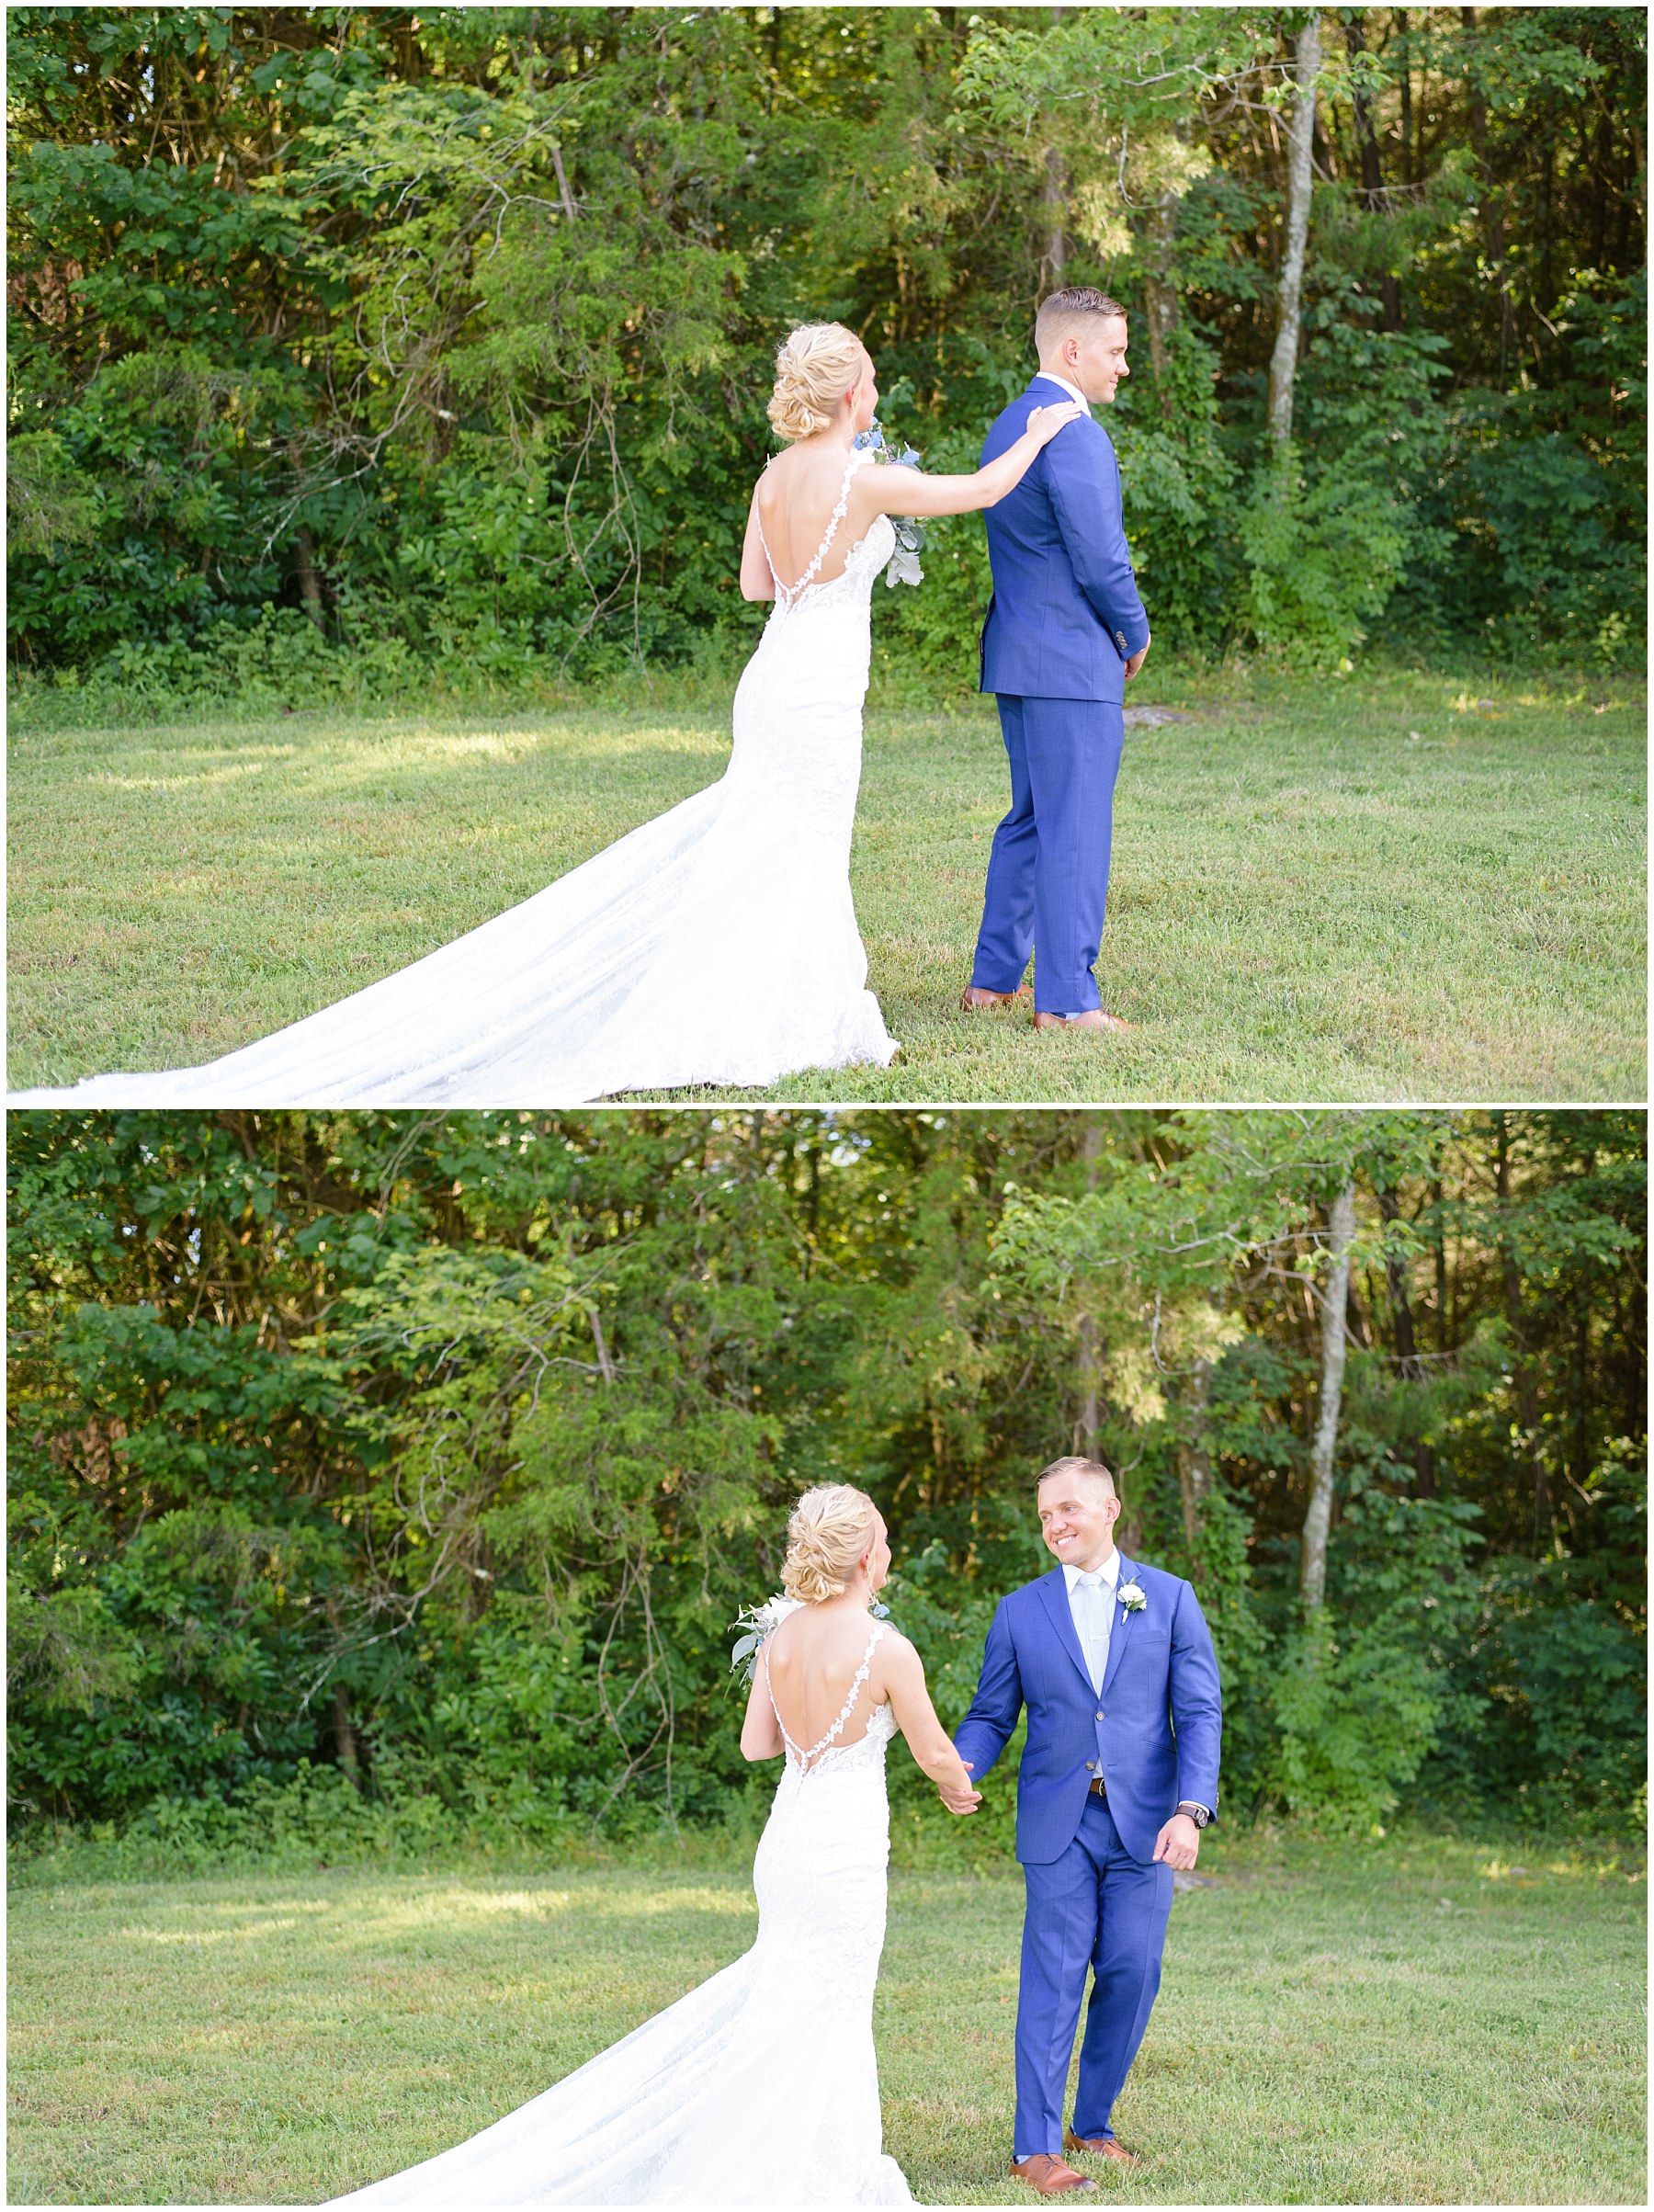 Nashville bride and groom's first look during their wedding day at Tucker's Gap Event Center